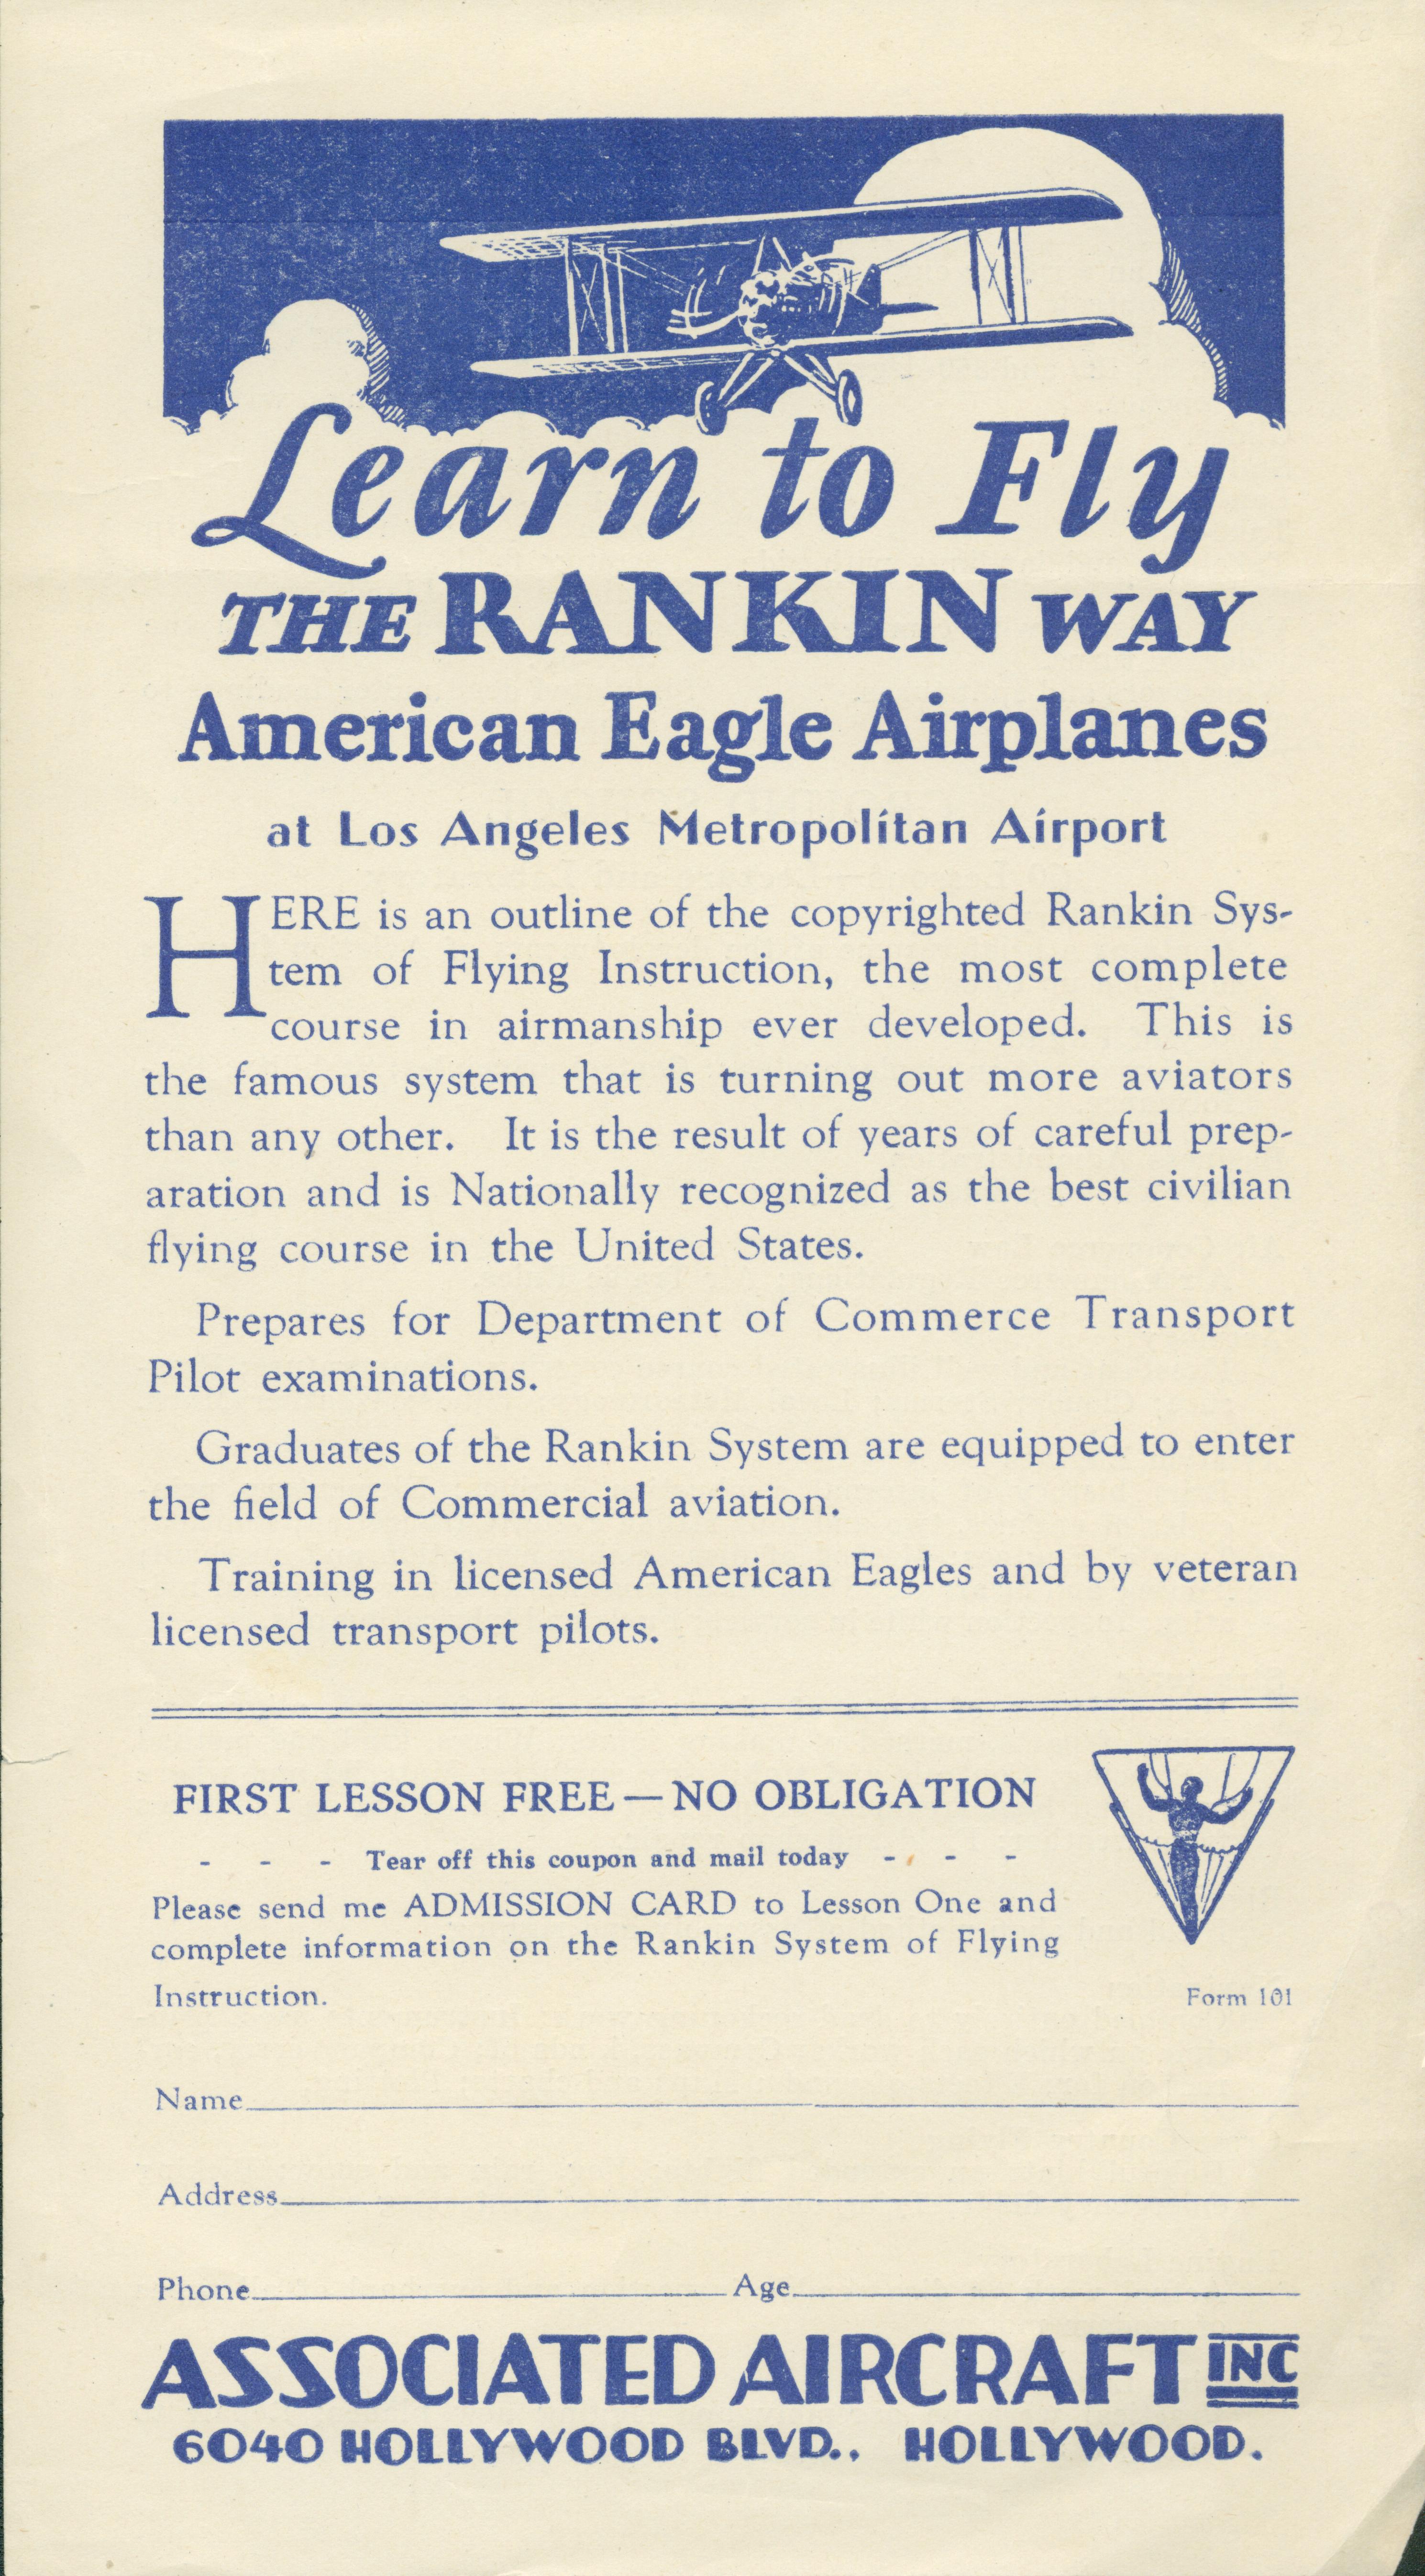 This advertisement shows a biplane in flight, above infomation about the 'Ranking System of Flying Instruction.'